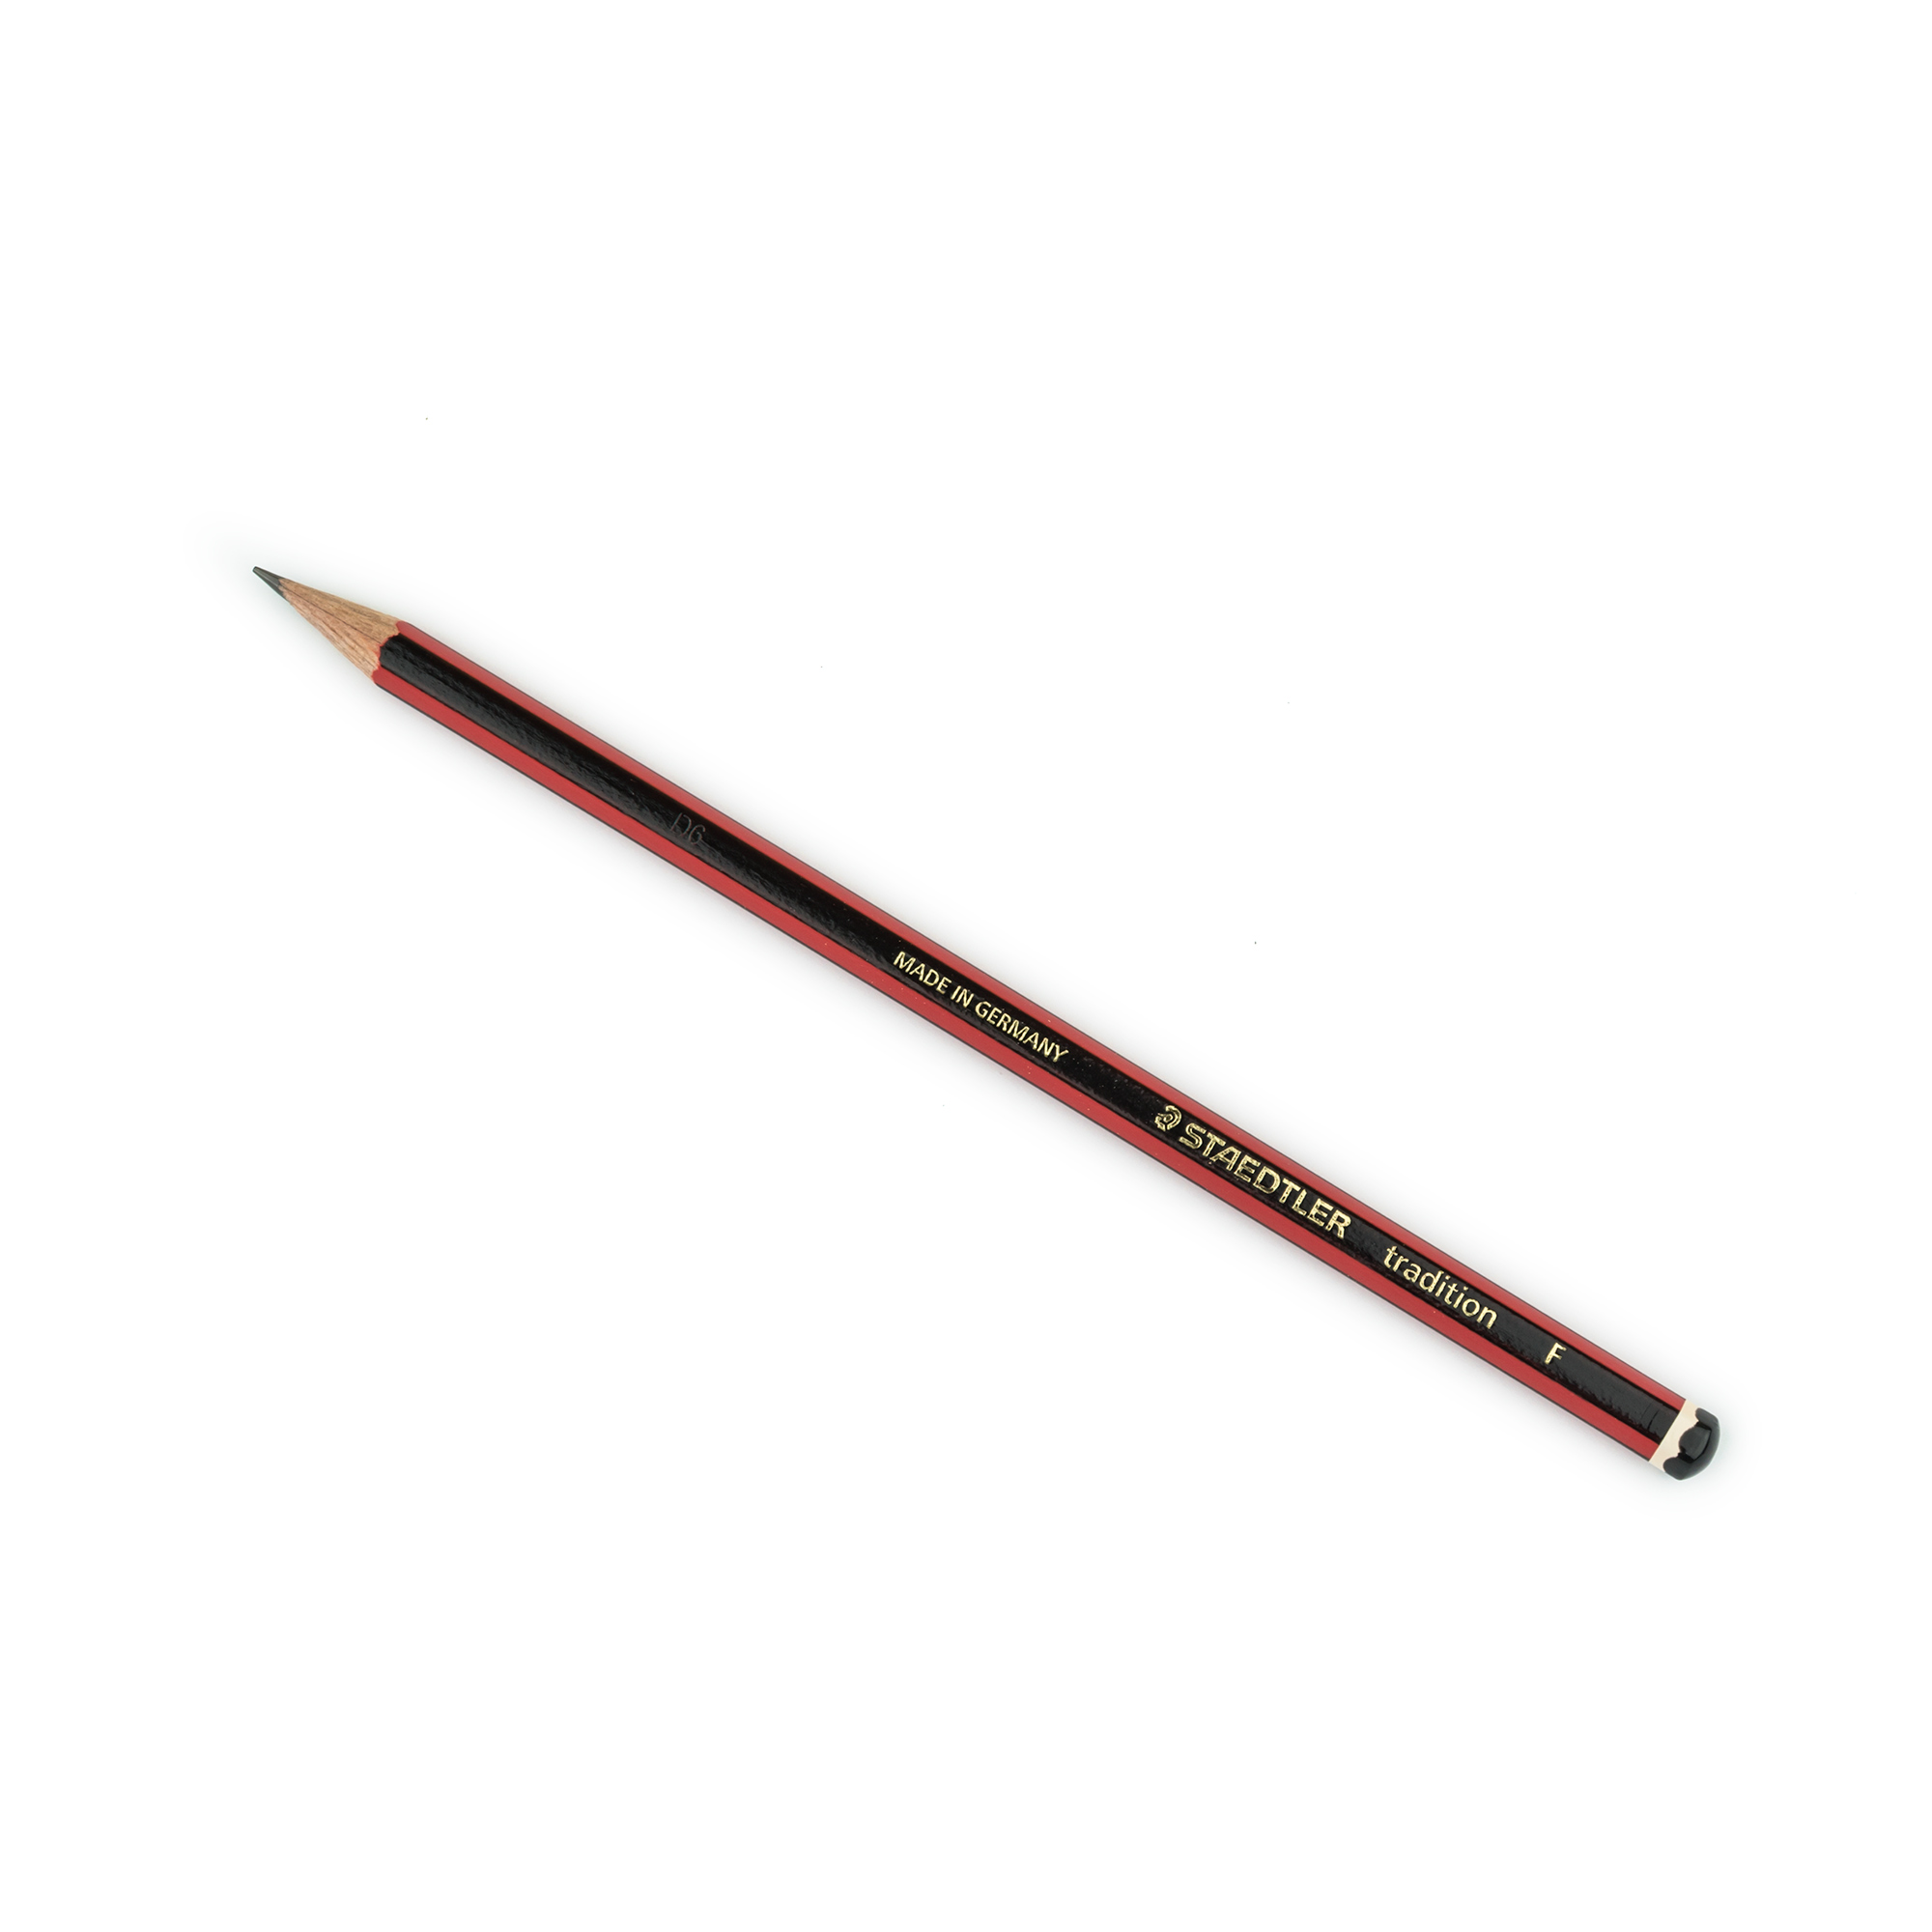 STAEDTLER F TRADITION PENCIL